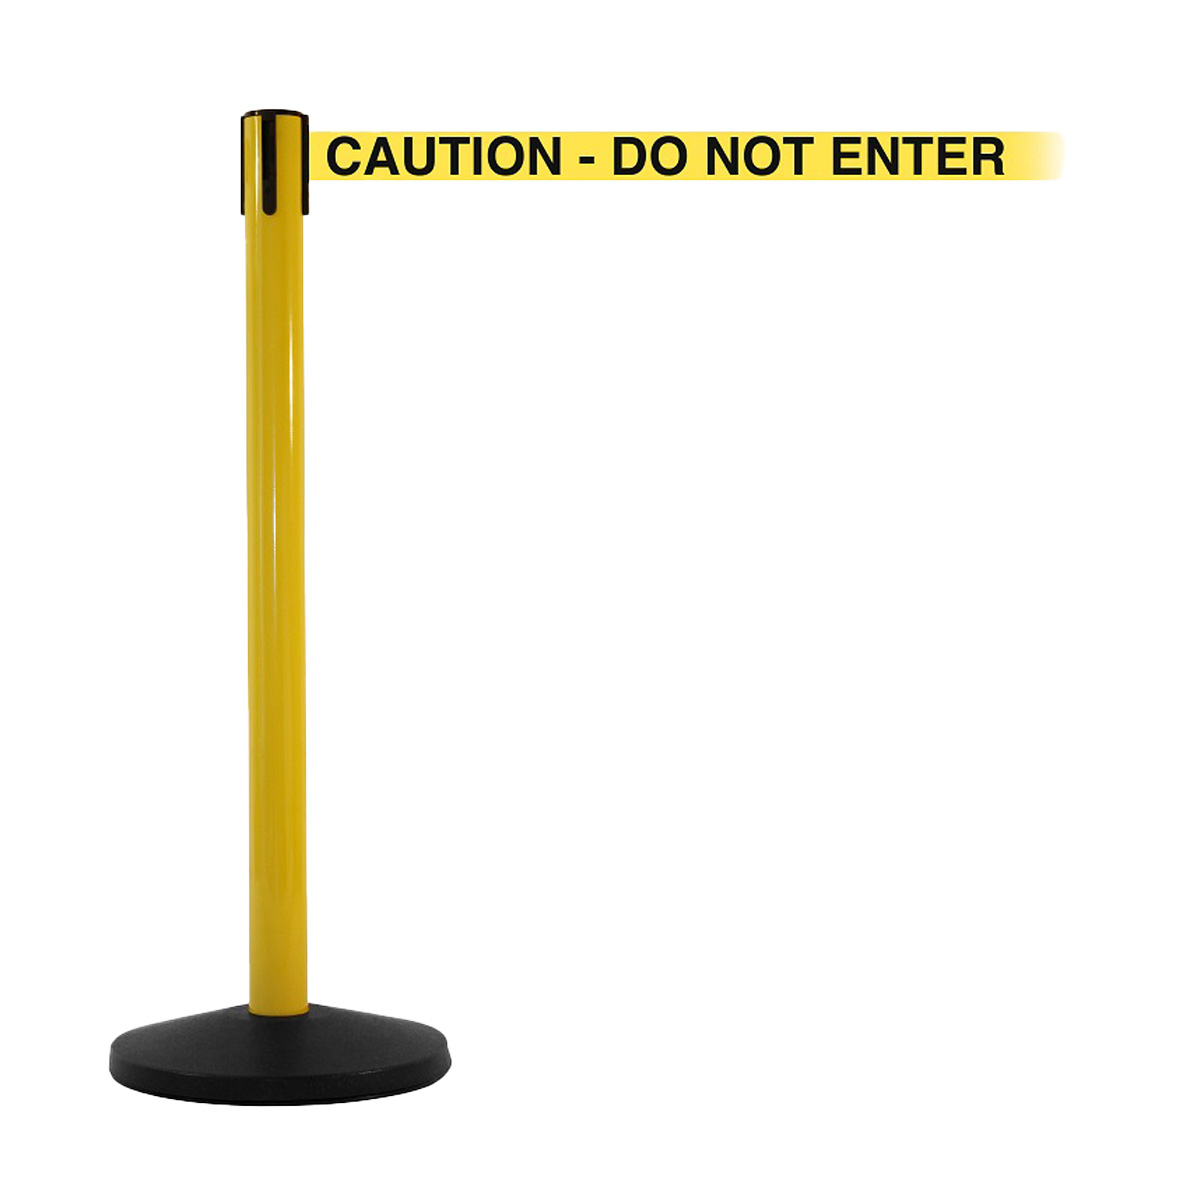 SafetyMaster Retracting Safety Barriers - Caution Do Not Enter Safety Message Belt